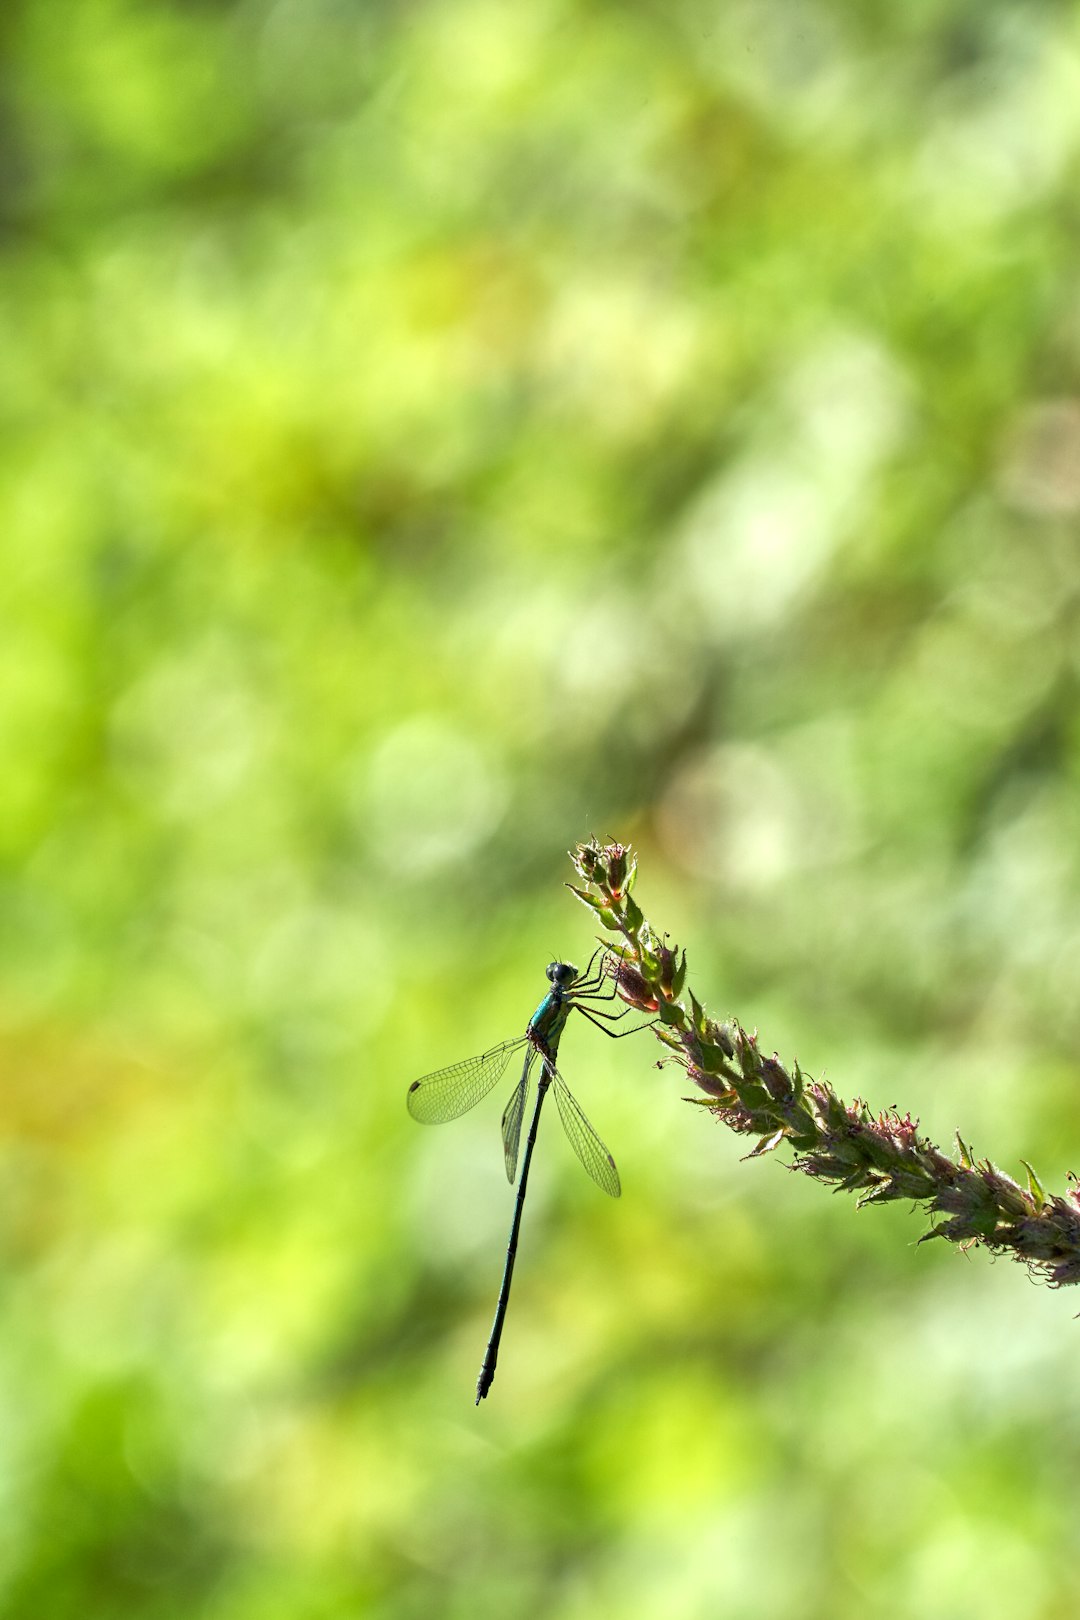 green dragonfly perched on green grass in close up photography during daytime